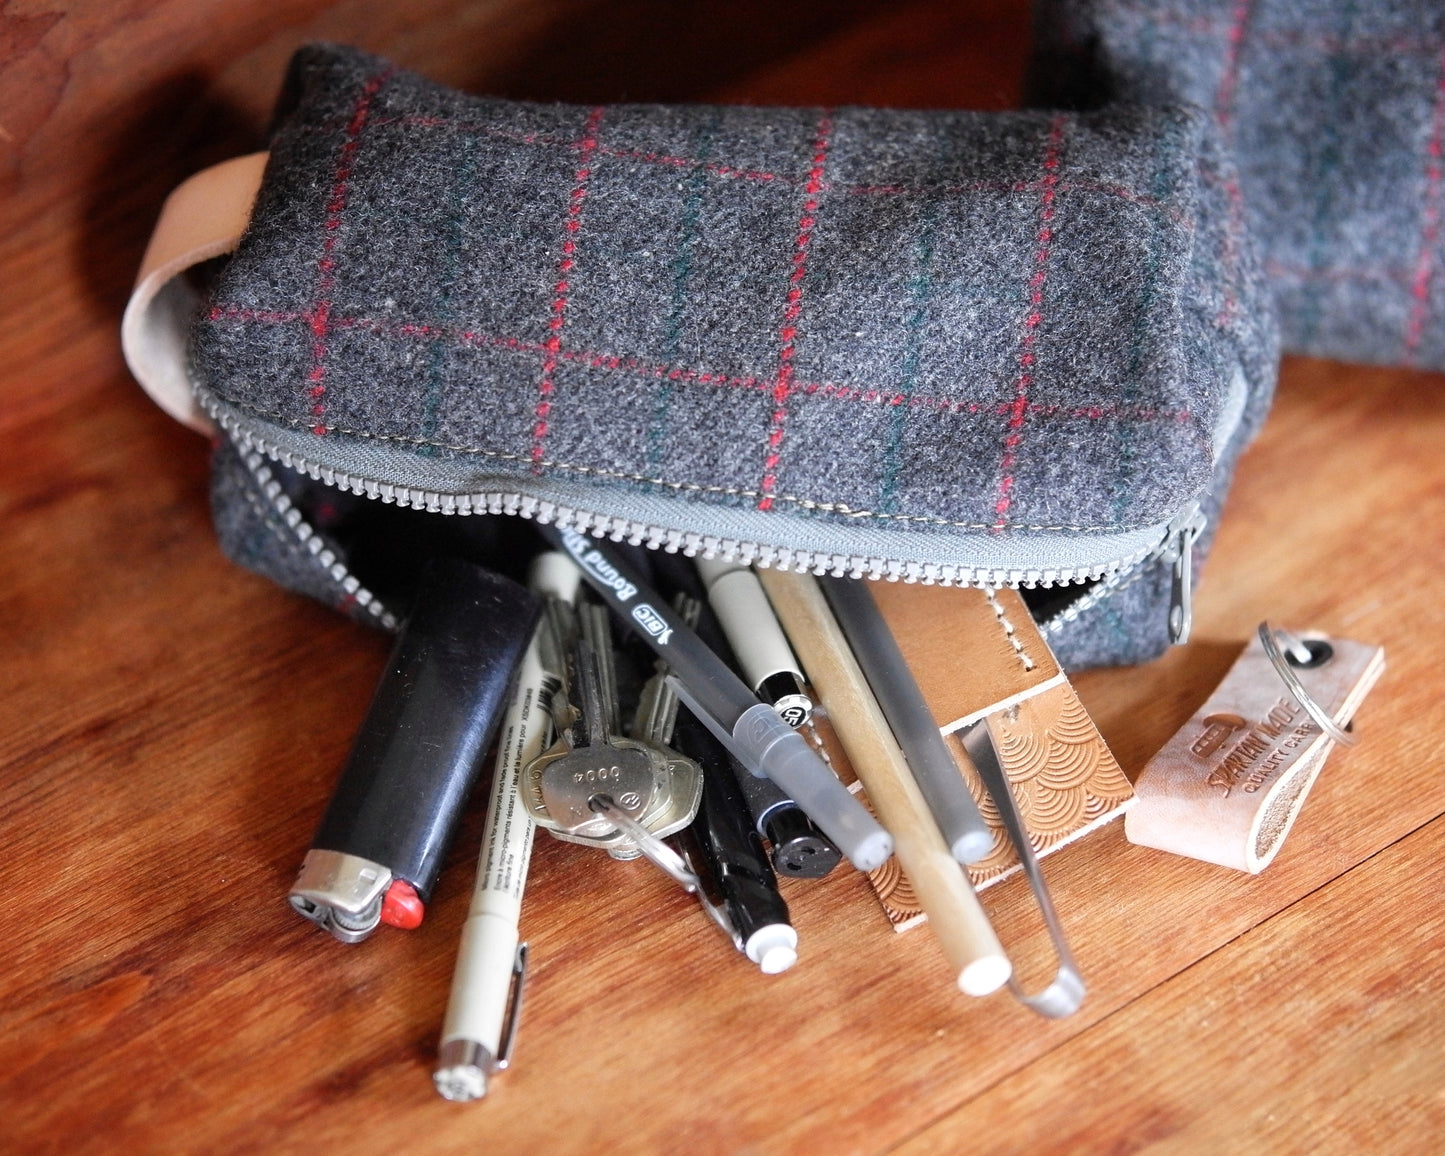 Upcycled Wool Utility Pouch